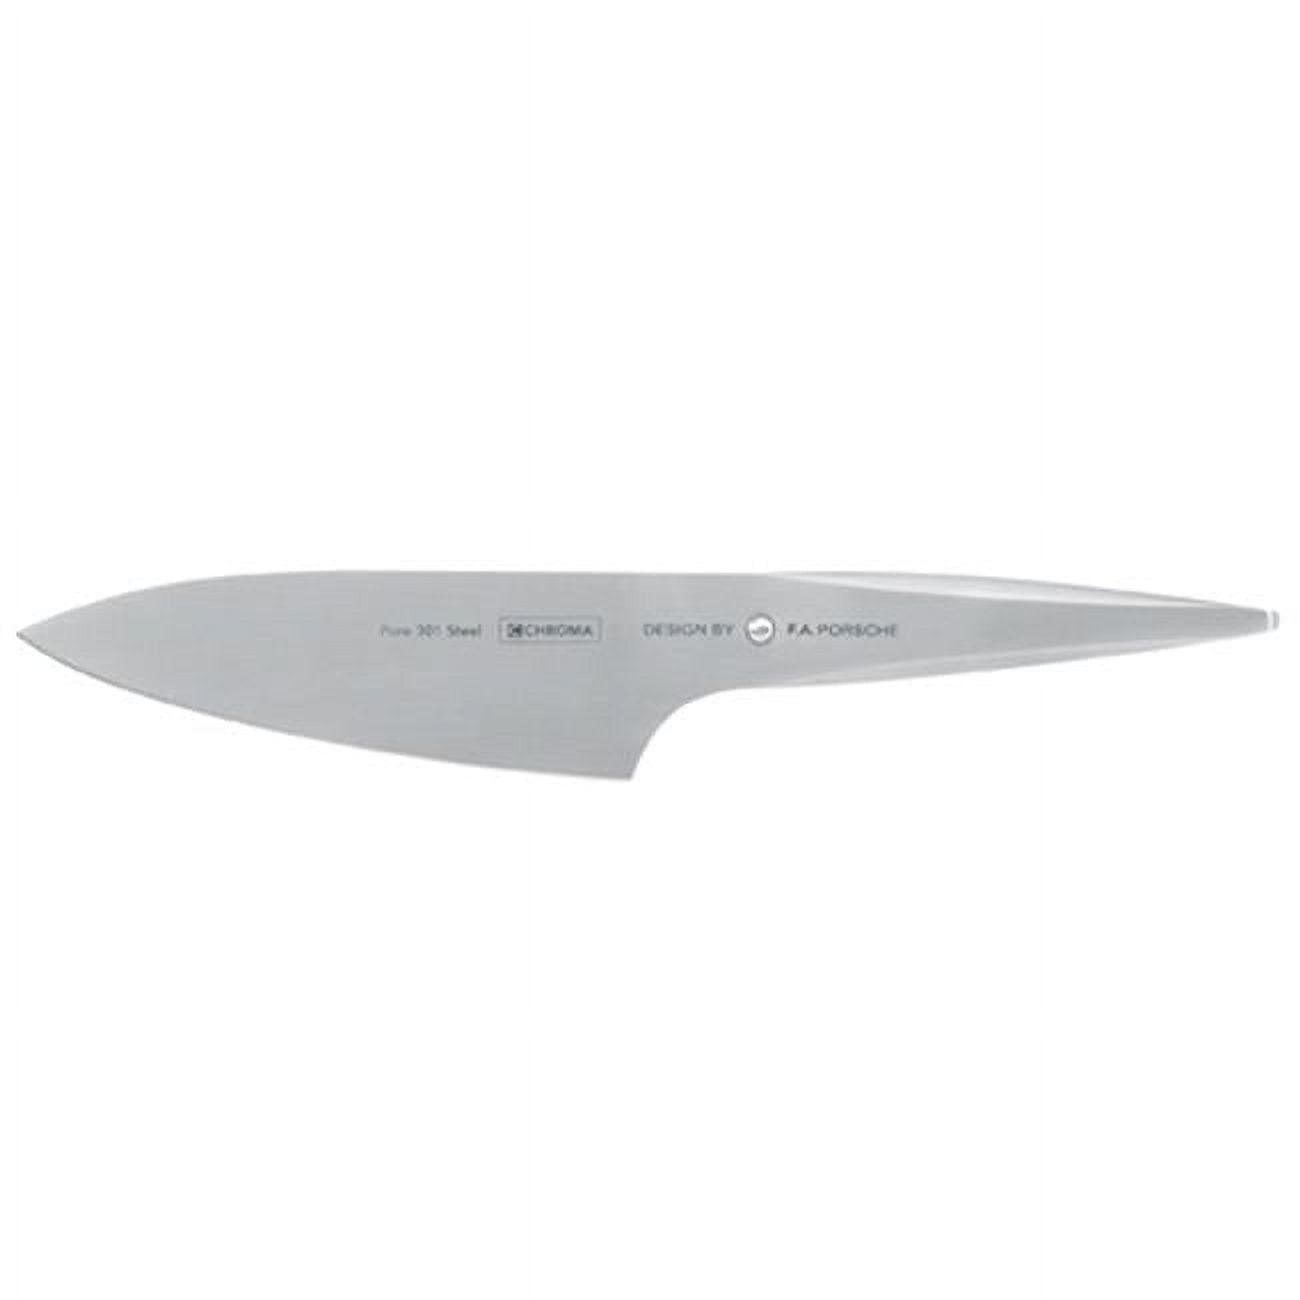 Chroma P03 Type 301 Designed By F.a. Porsche 6.25 In. Japanese Veggie Knife